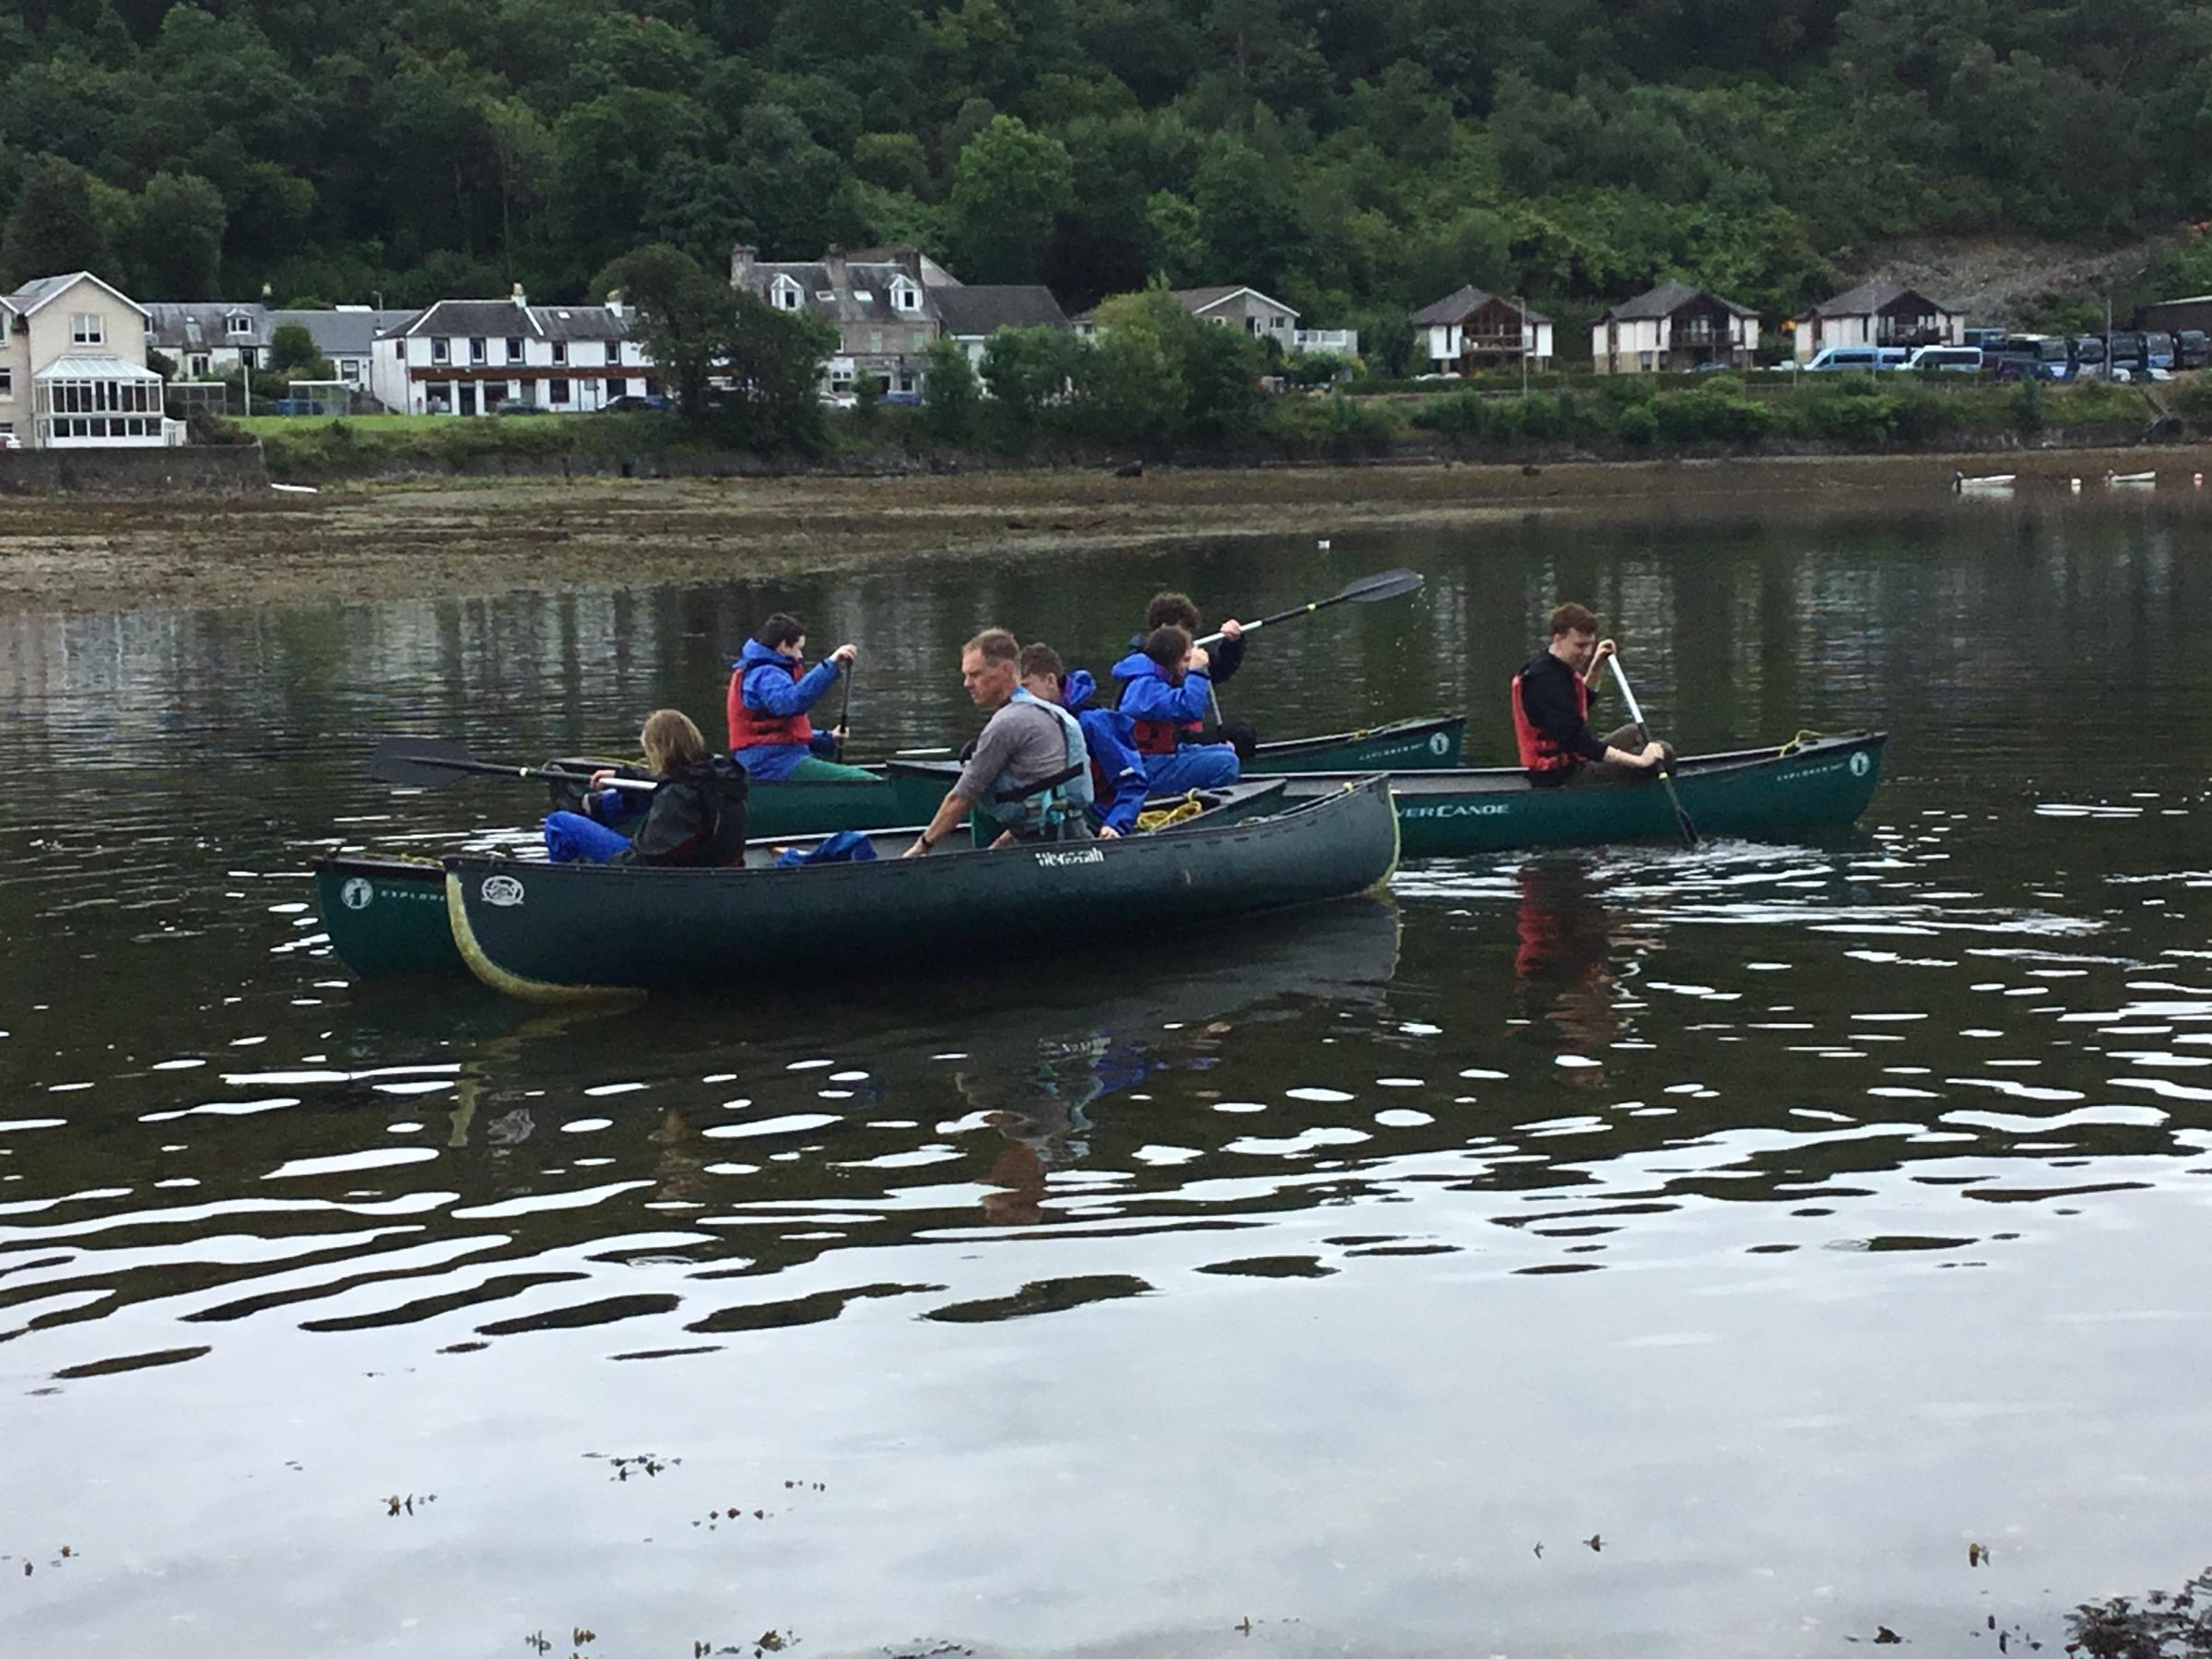 Canoeing on the Gareloch